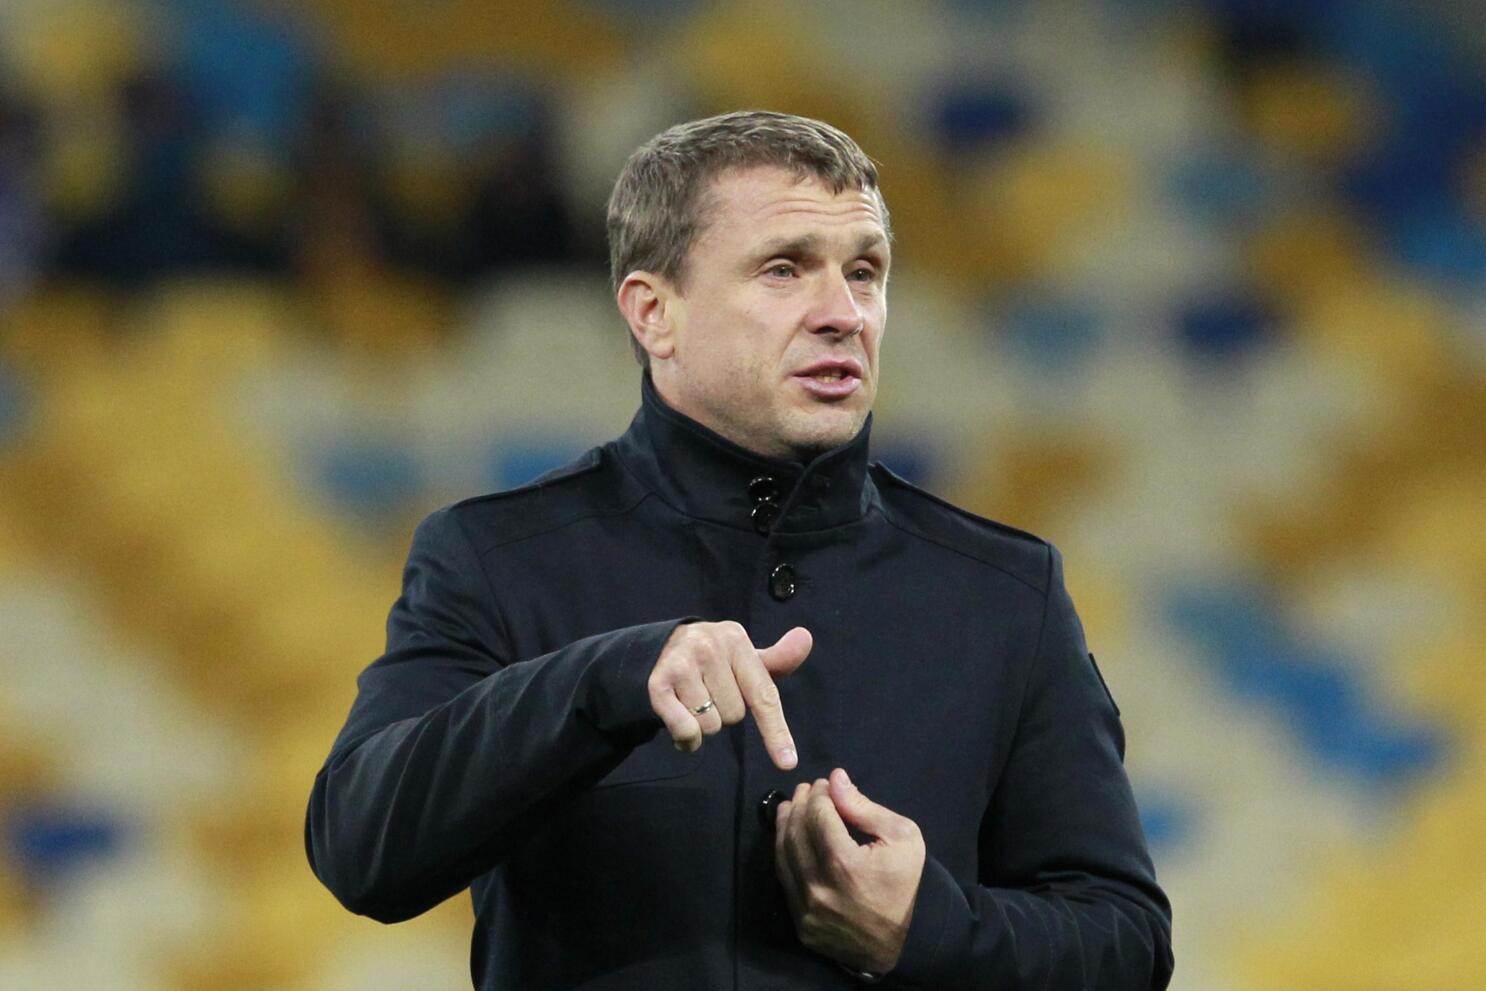 Ukraine coach Serhiy Rebrov believes his side has everything in their power to cause an upset to Italy in their Euro Qualifier at San Siro.